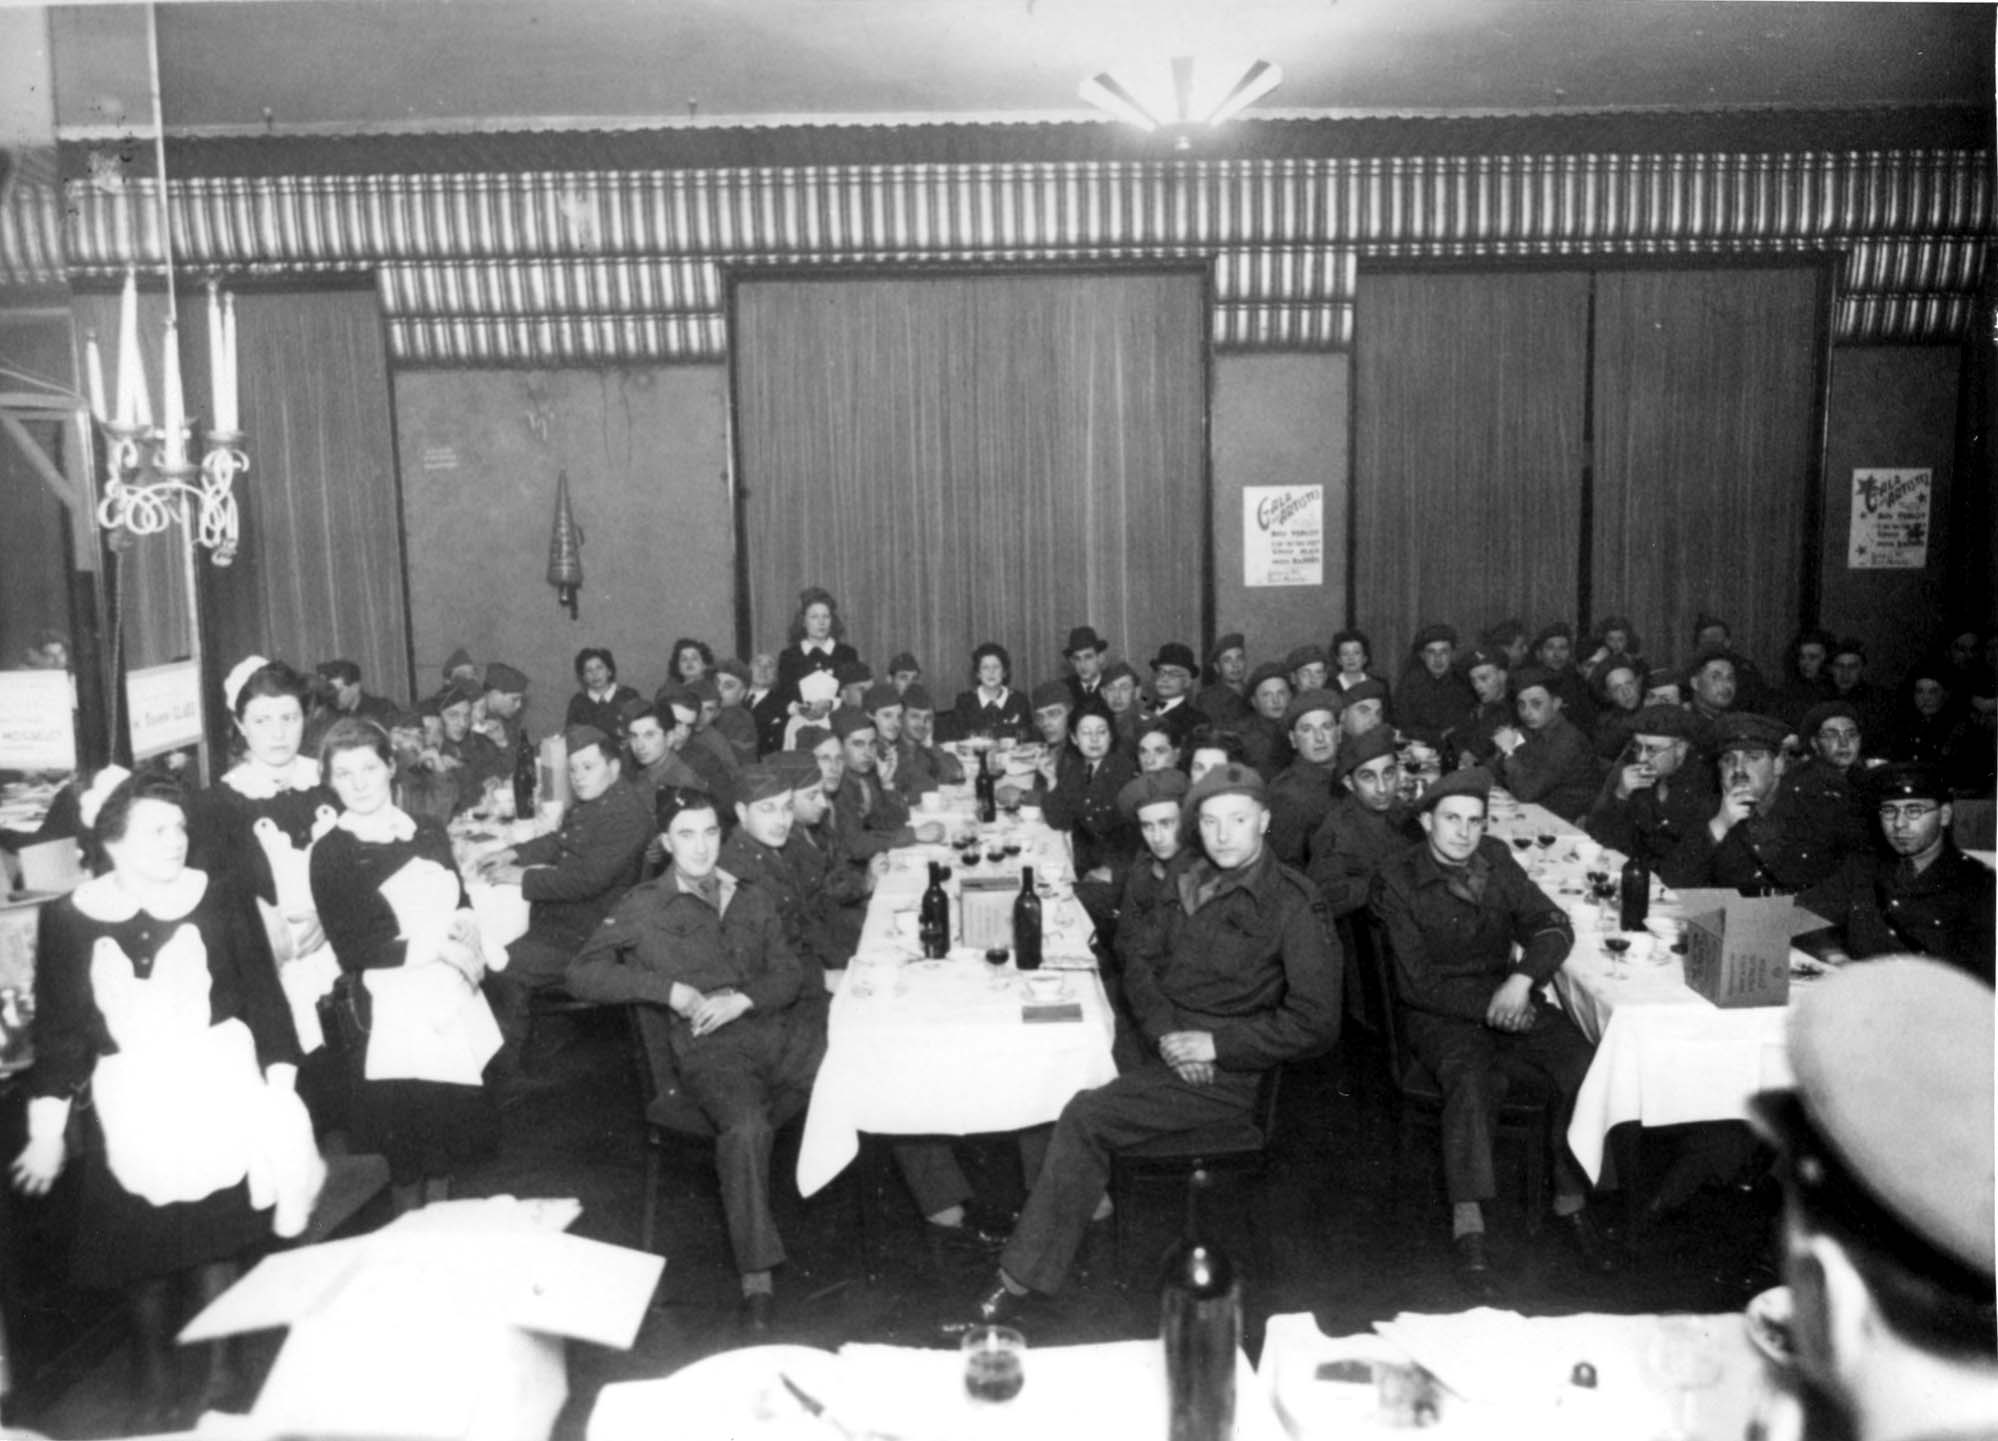 A Passover Seder held for Allied soldiers at the Bon Marche store, Belgium, 25/3/1945